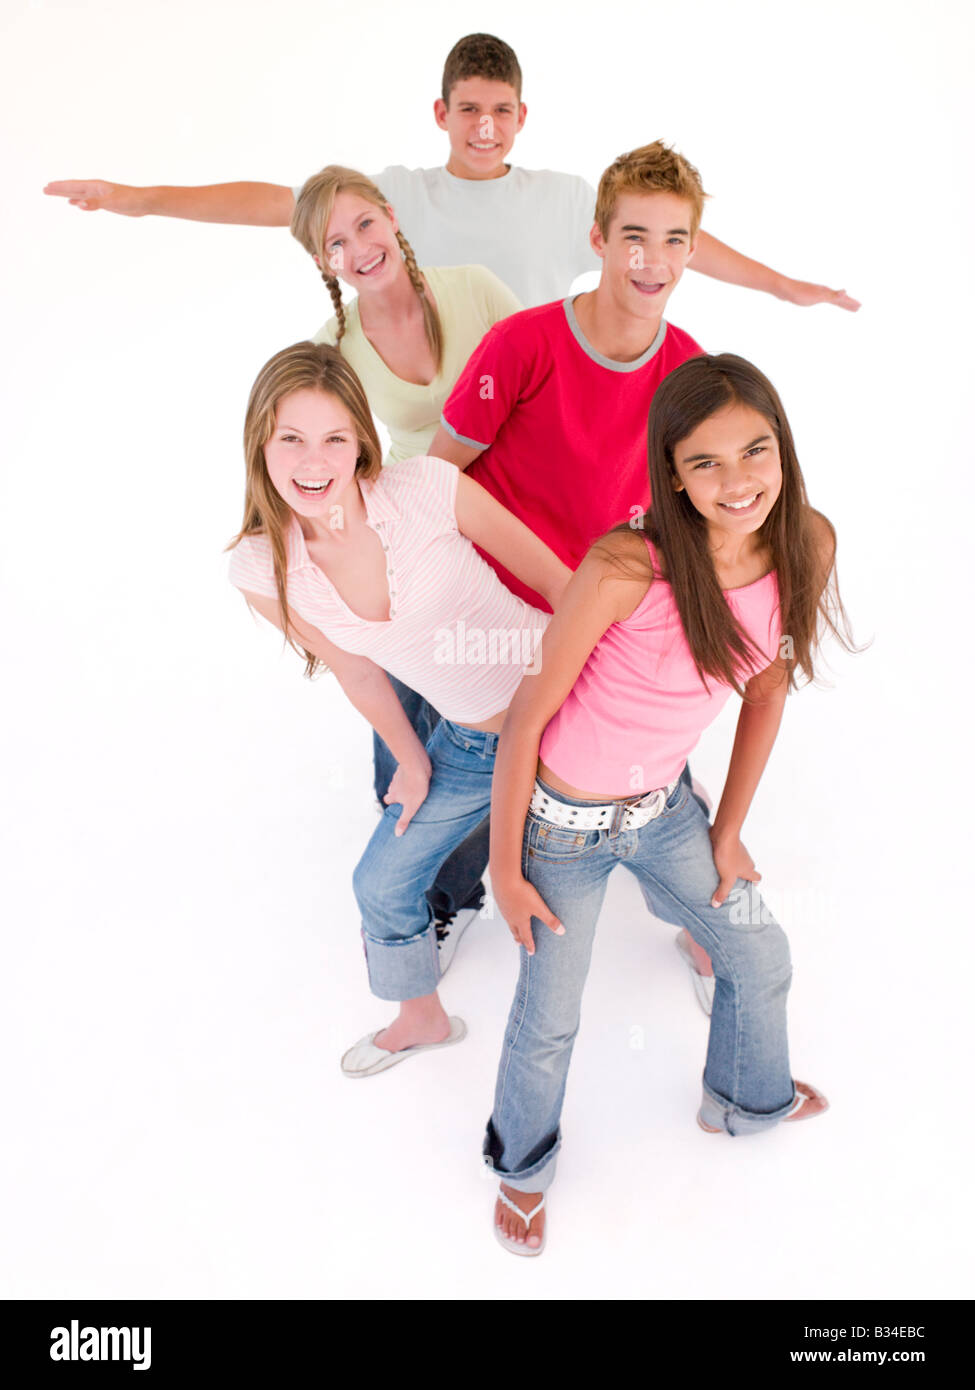 Five friends in a row smiling Stock Photo